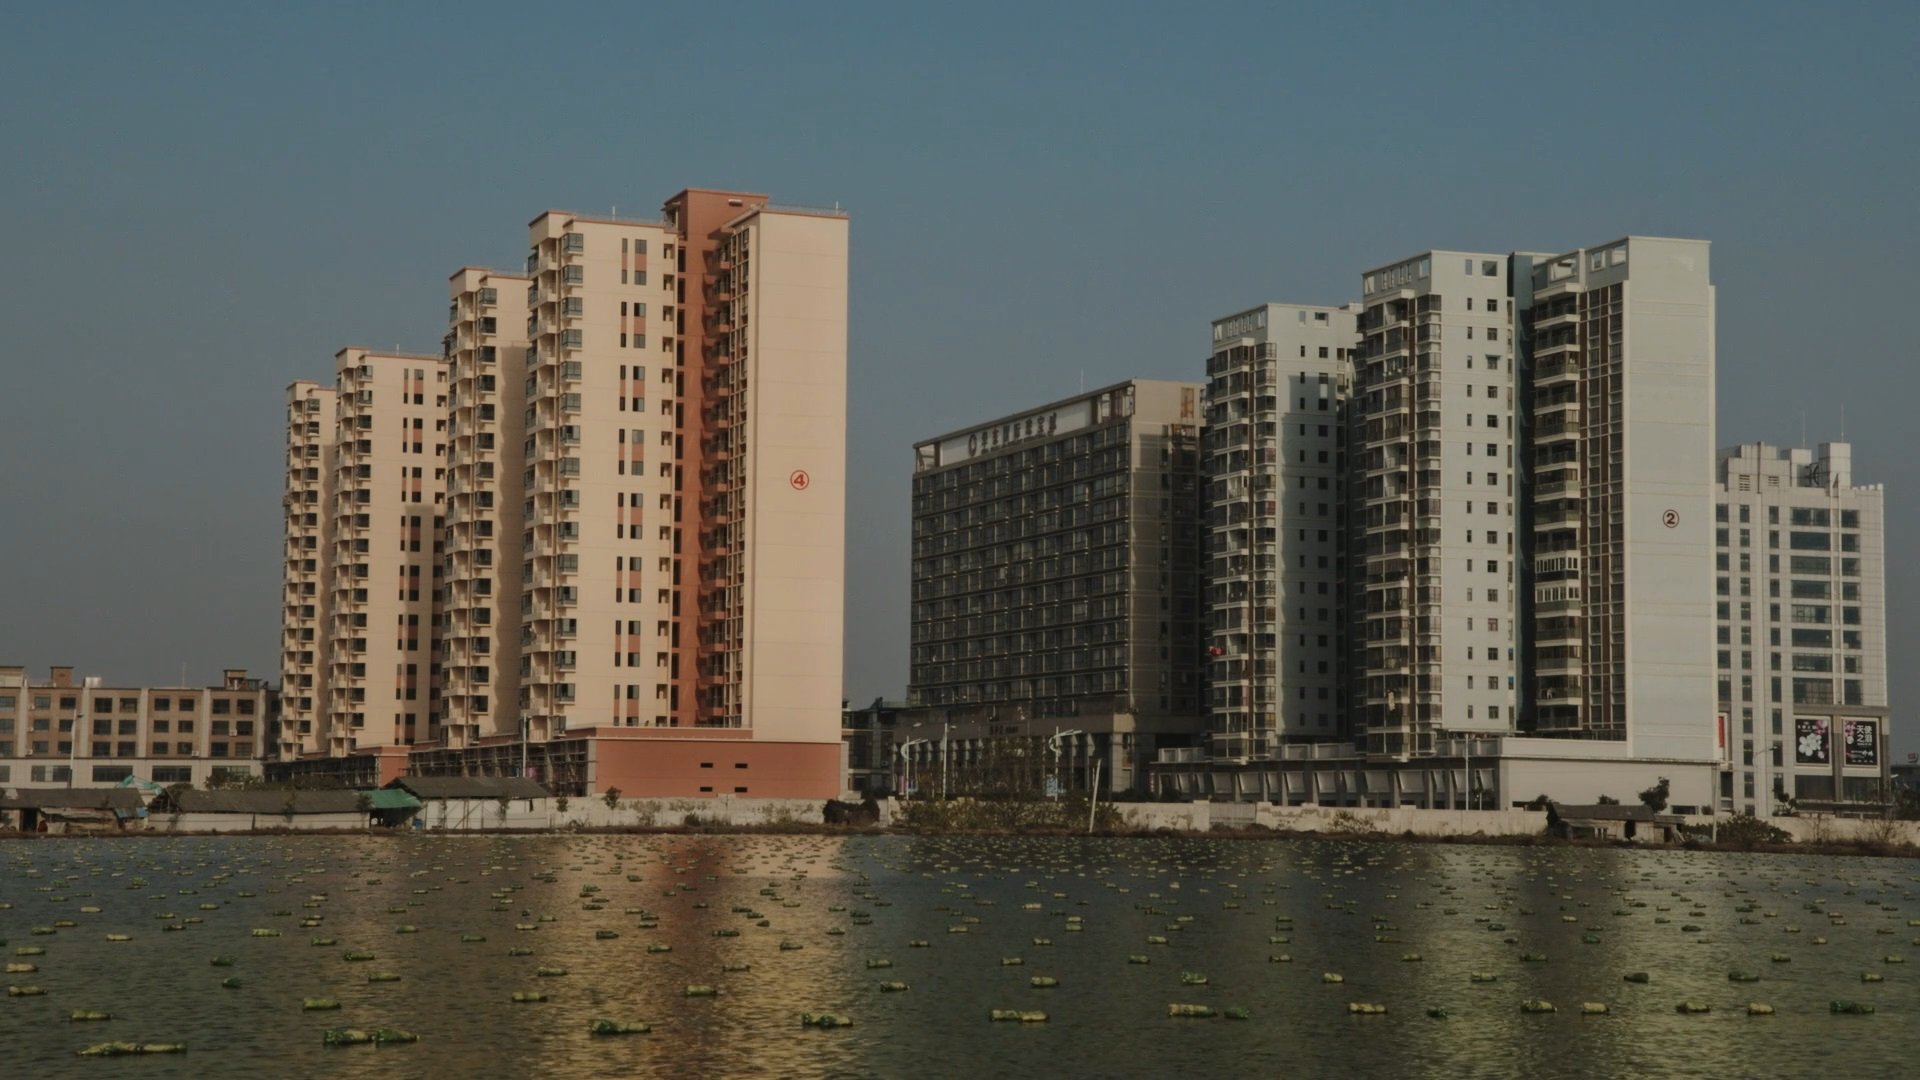 In the opening scene of 'NoNoseKnows,' tall buildings shadow irregular housing along a waterway. (Photo courtesy of Istanbul Biennial)